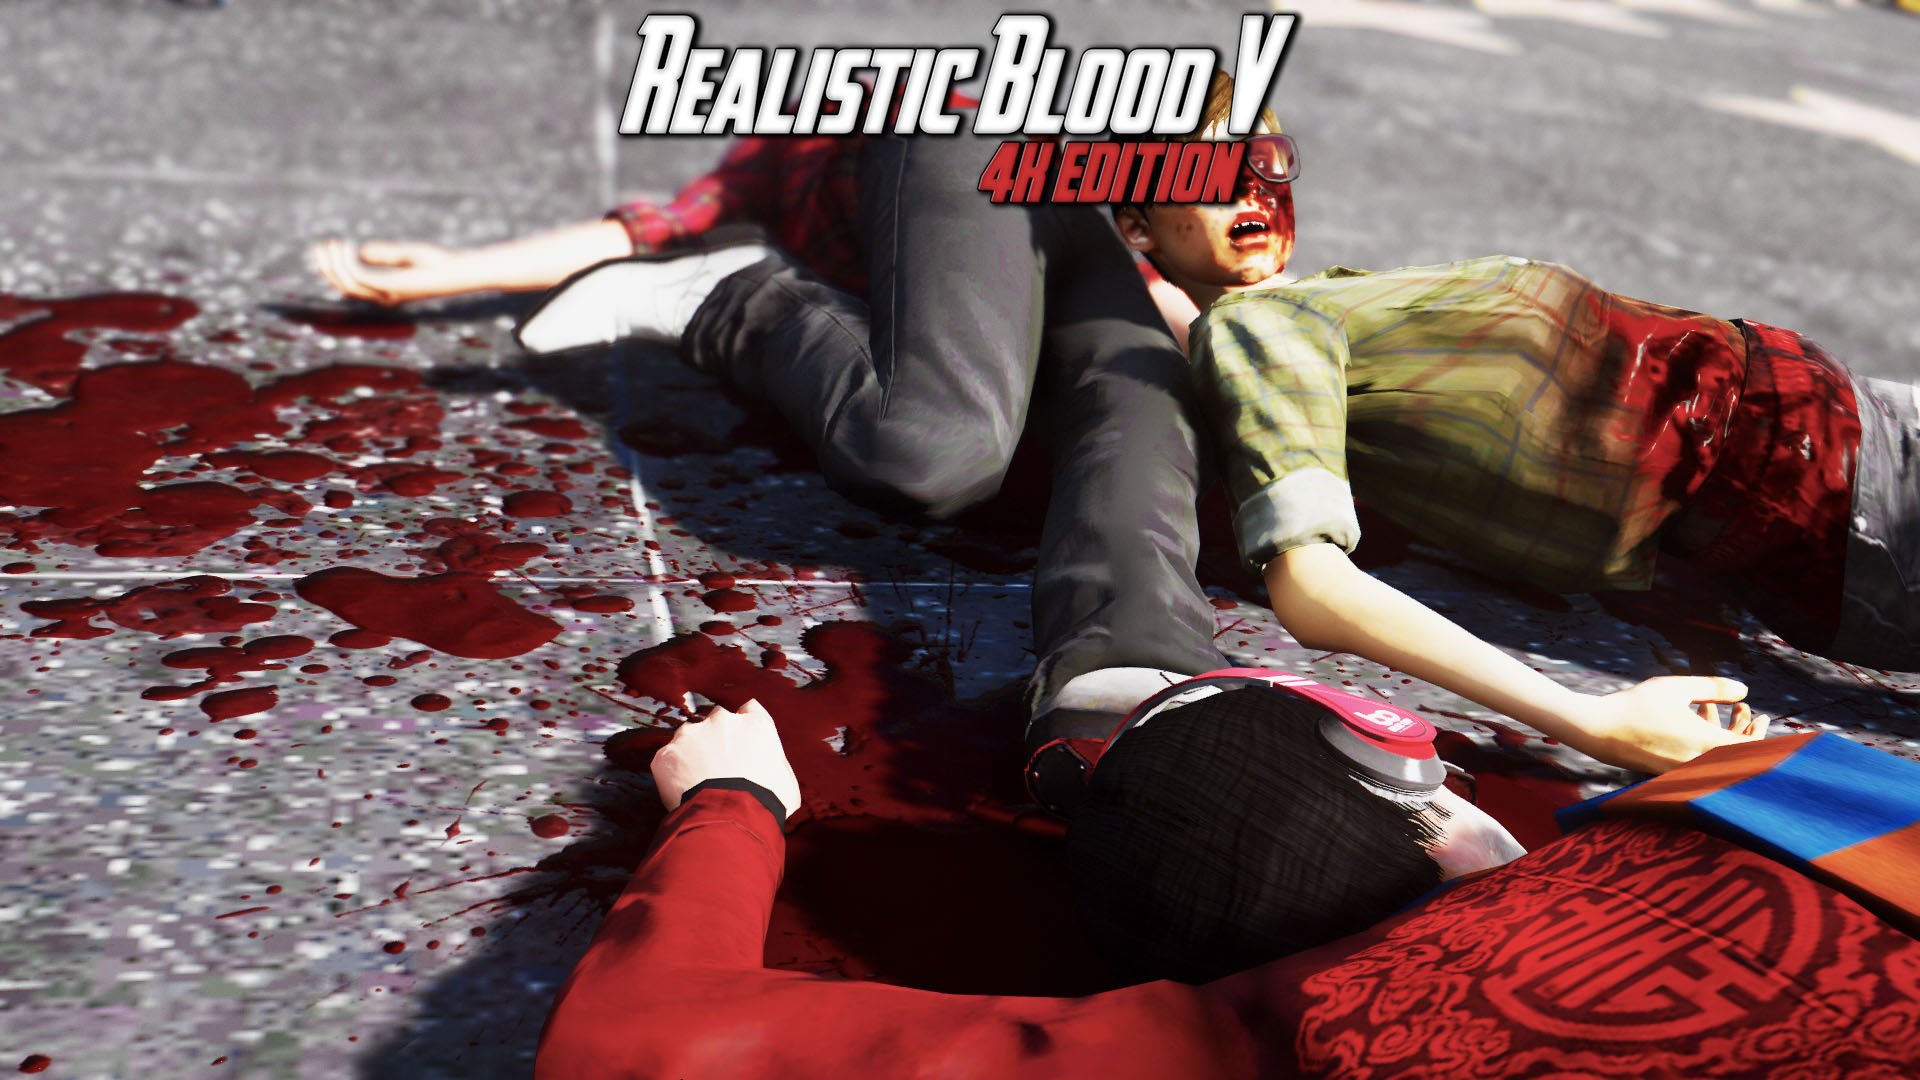 Gore and blood gta 5 фото 44